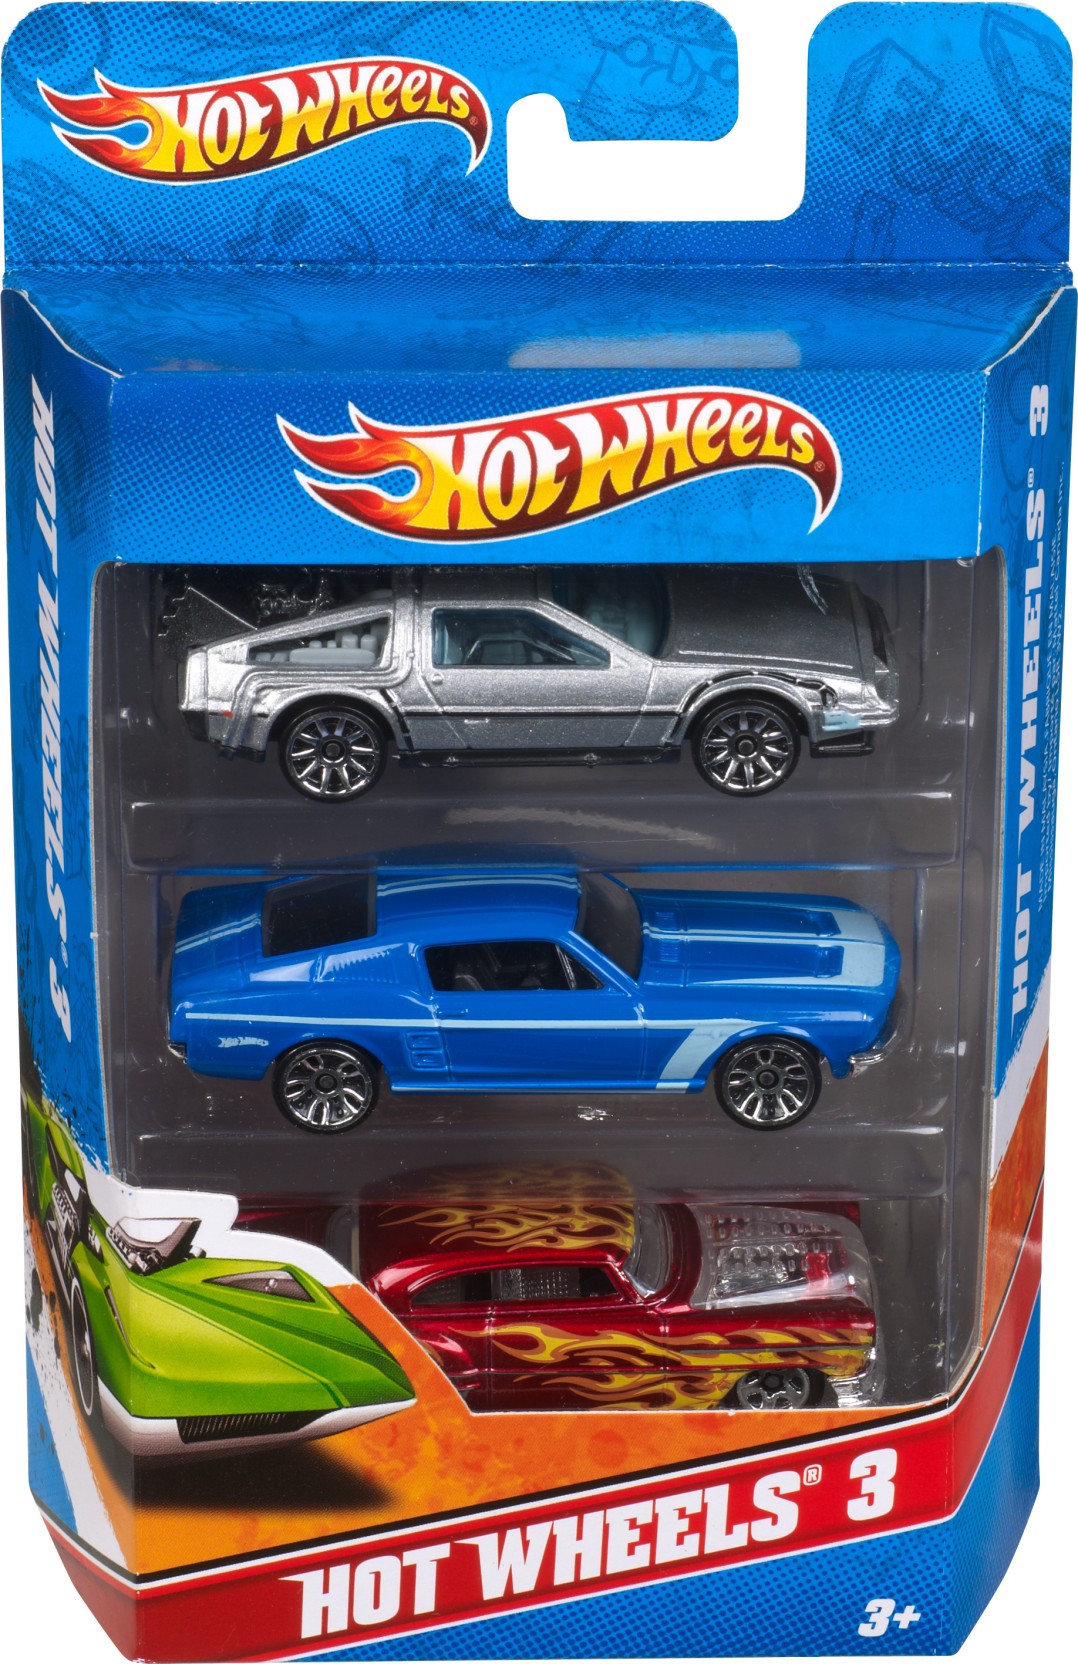 Hot Wheels 3 Car Pack - 3 Car Pack . shop for Hot Wheels products in